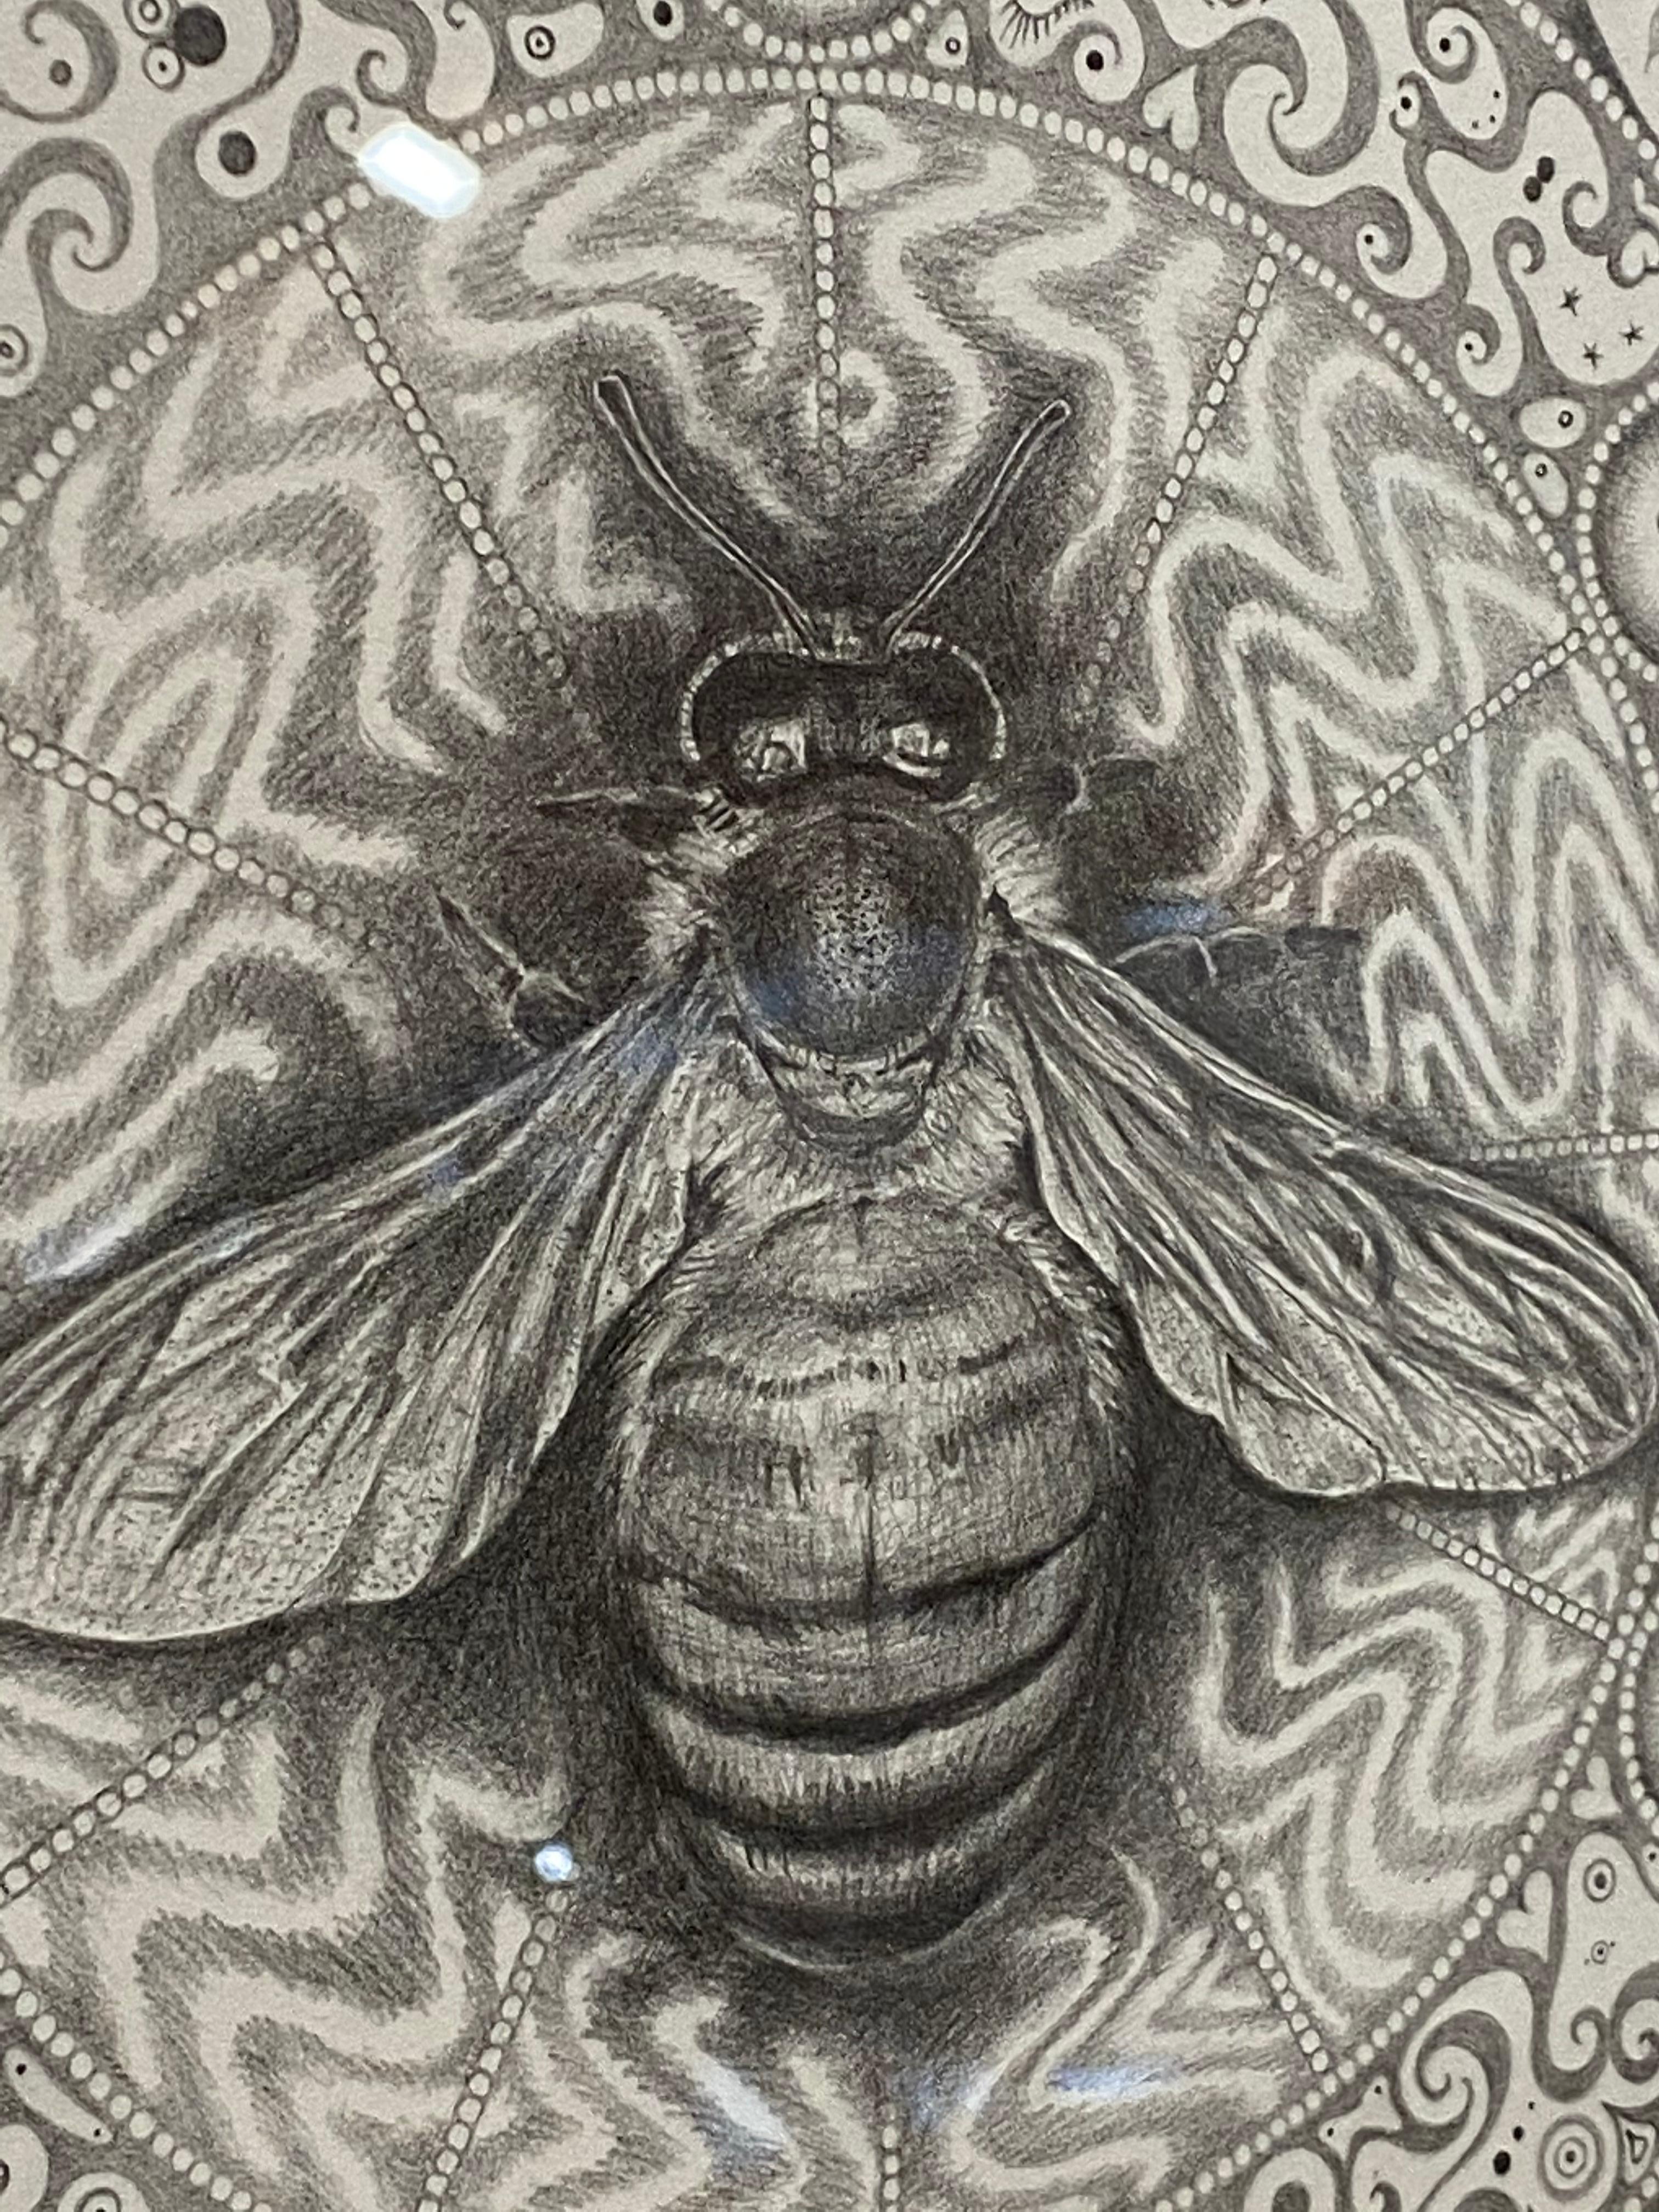 A meticulously rendered bee at the center of this drawing is the prominent feature of this mandala. Many cultures associate bees with community, courage, and personal power, a widely held symbol for productivity. Intricately drawn patterns and small